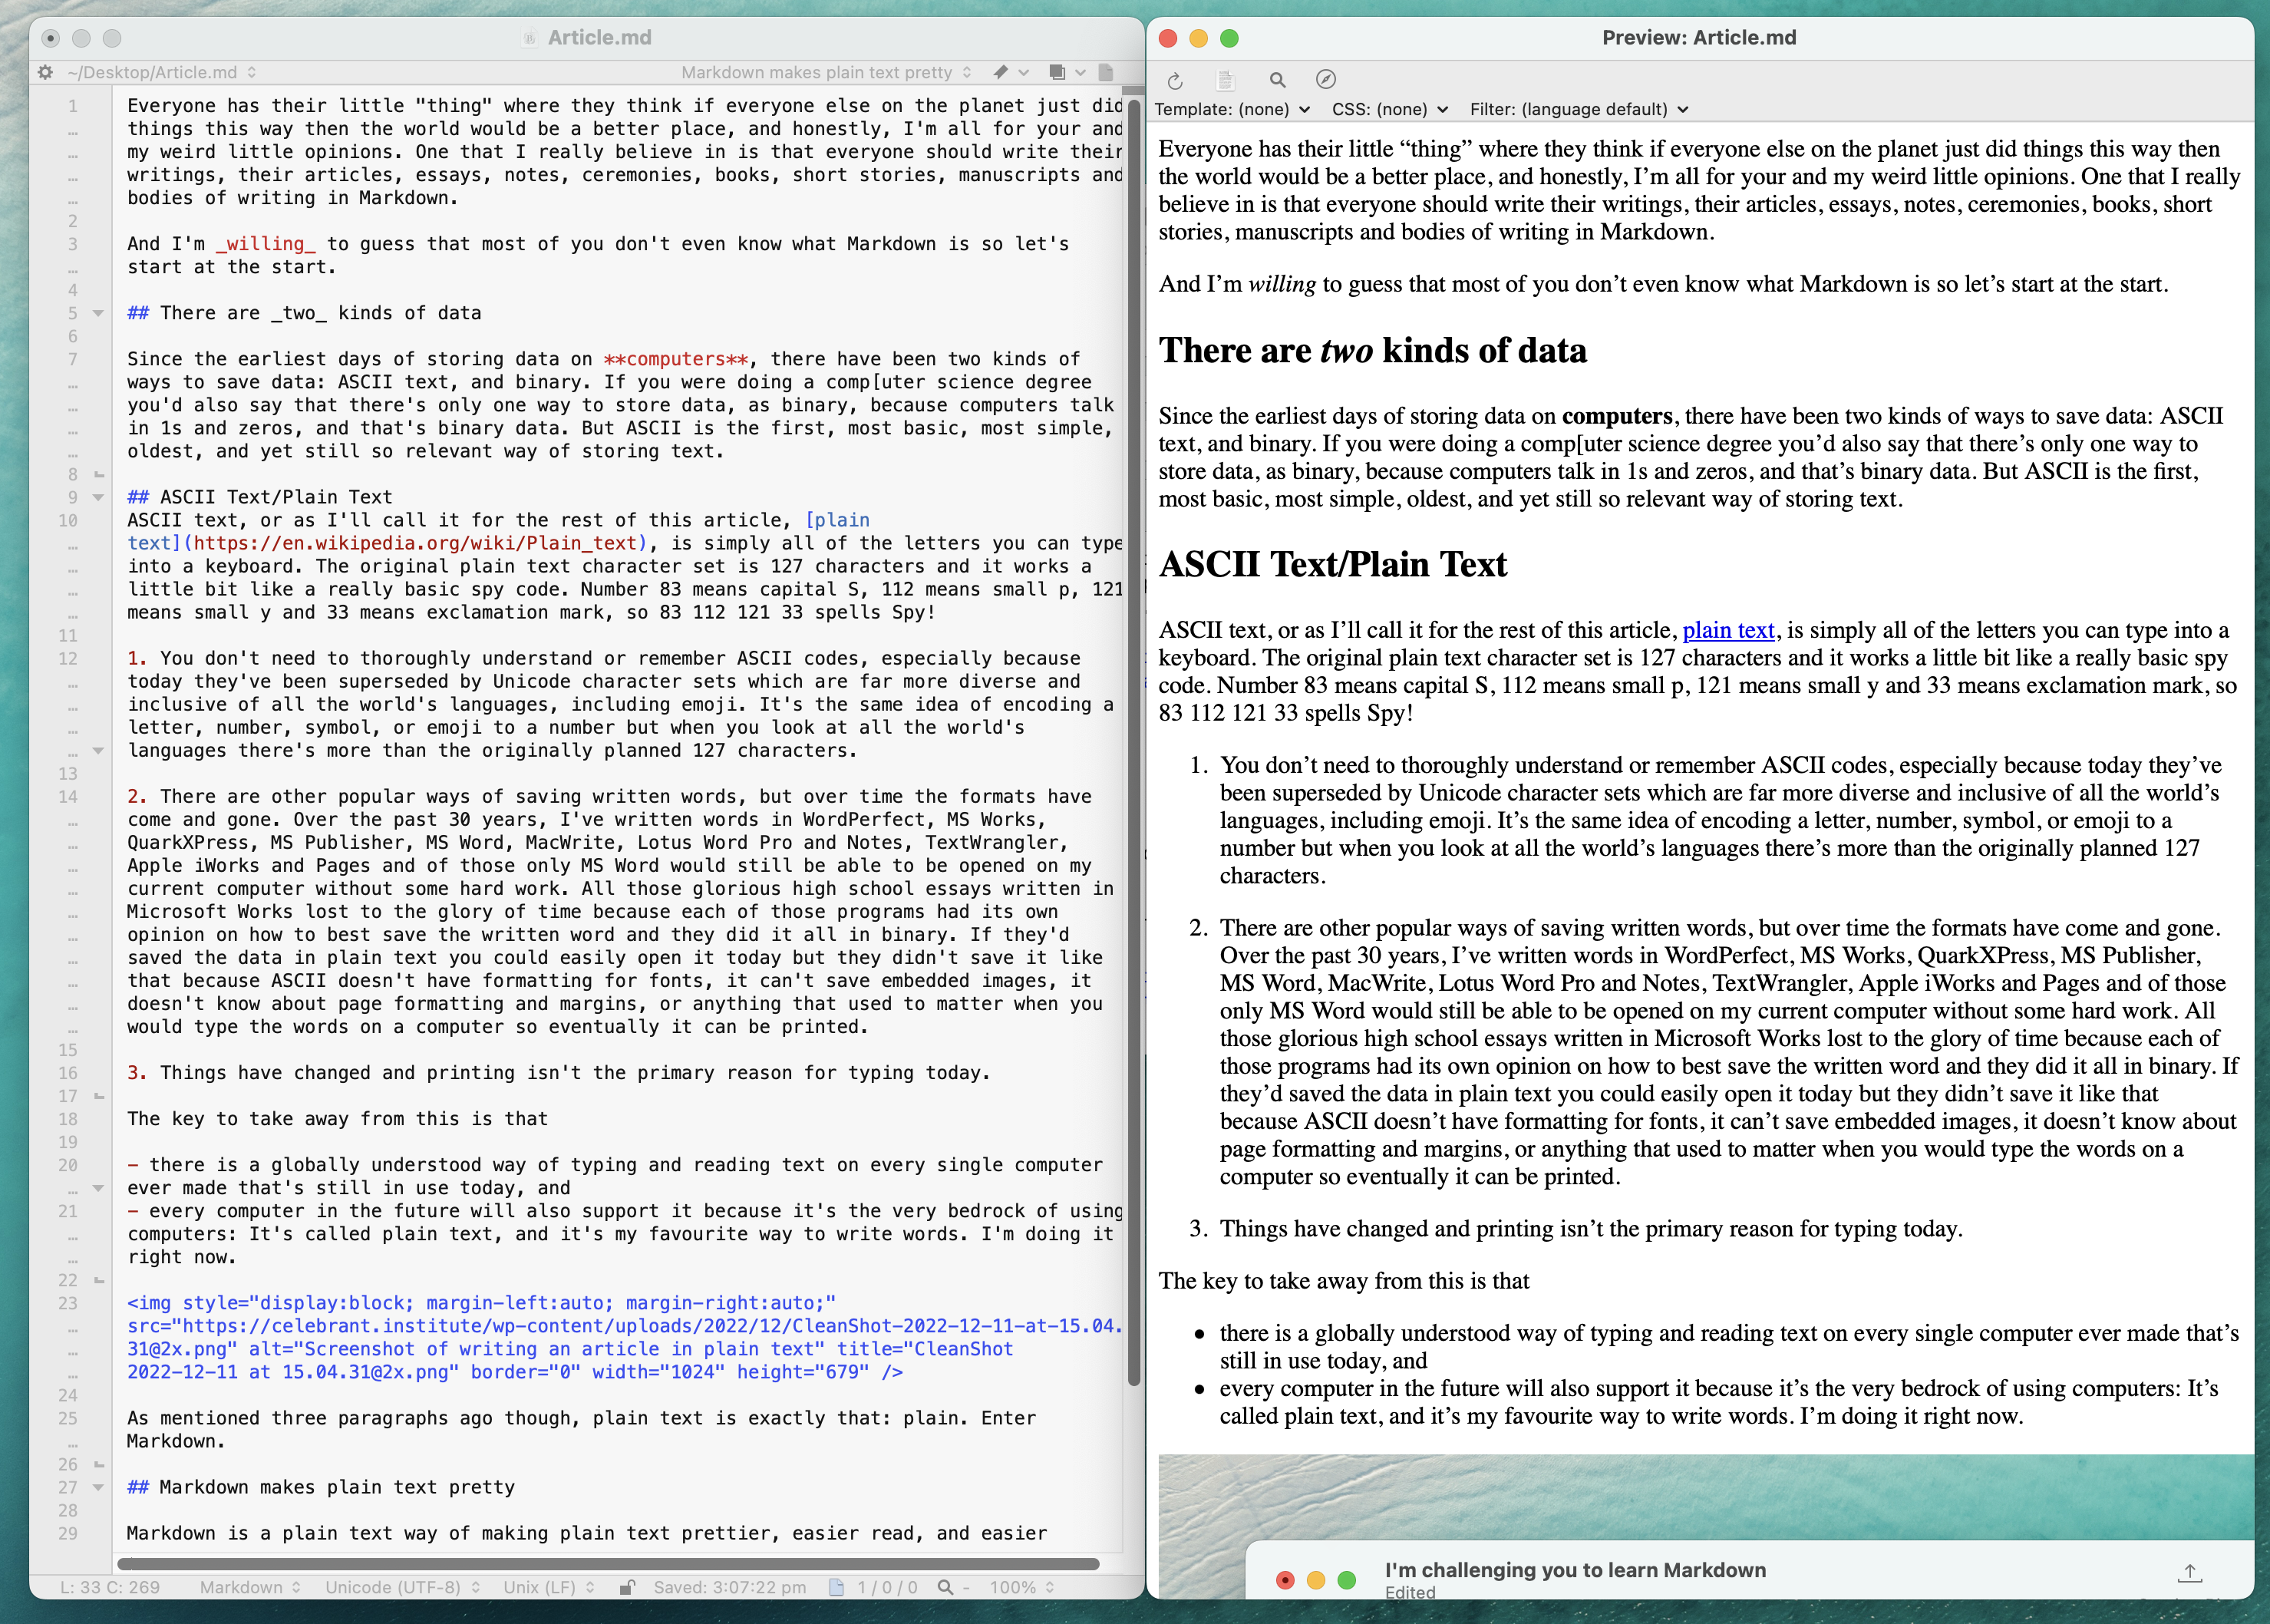 Example of Markdown text being formatted for the web